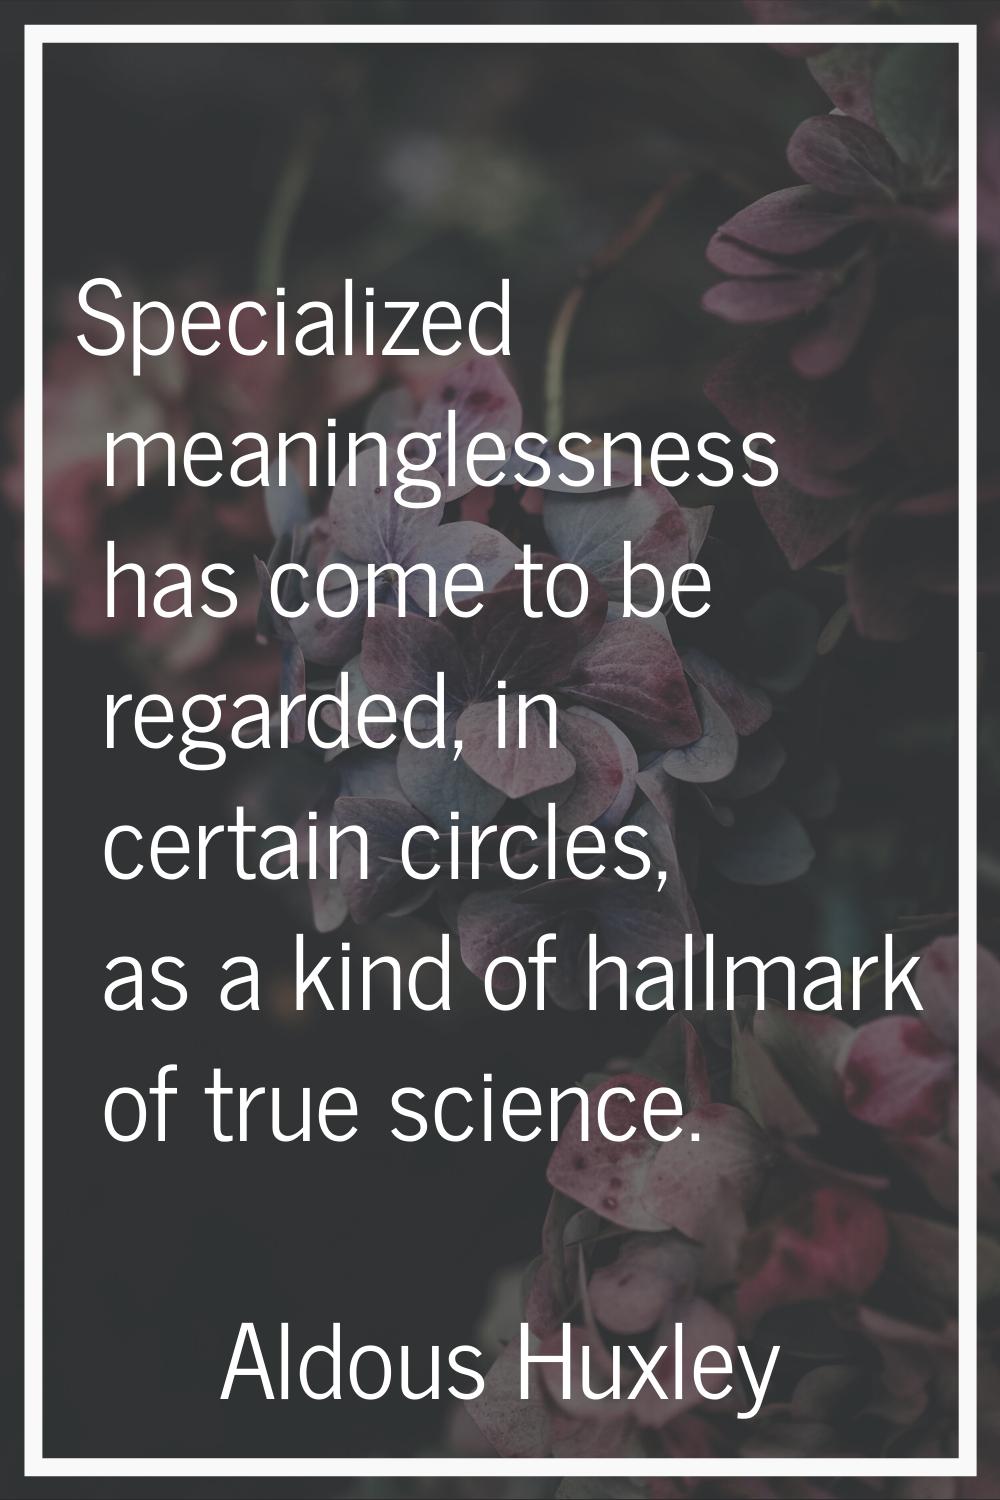 Specialized meaninglessness has come to be regarded, in certain circles, as a kind of hallmark of t